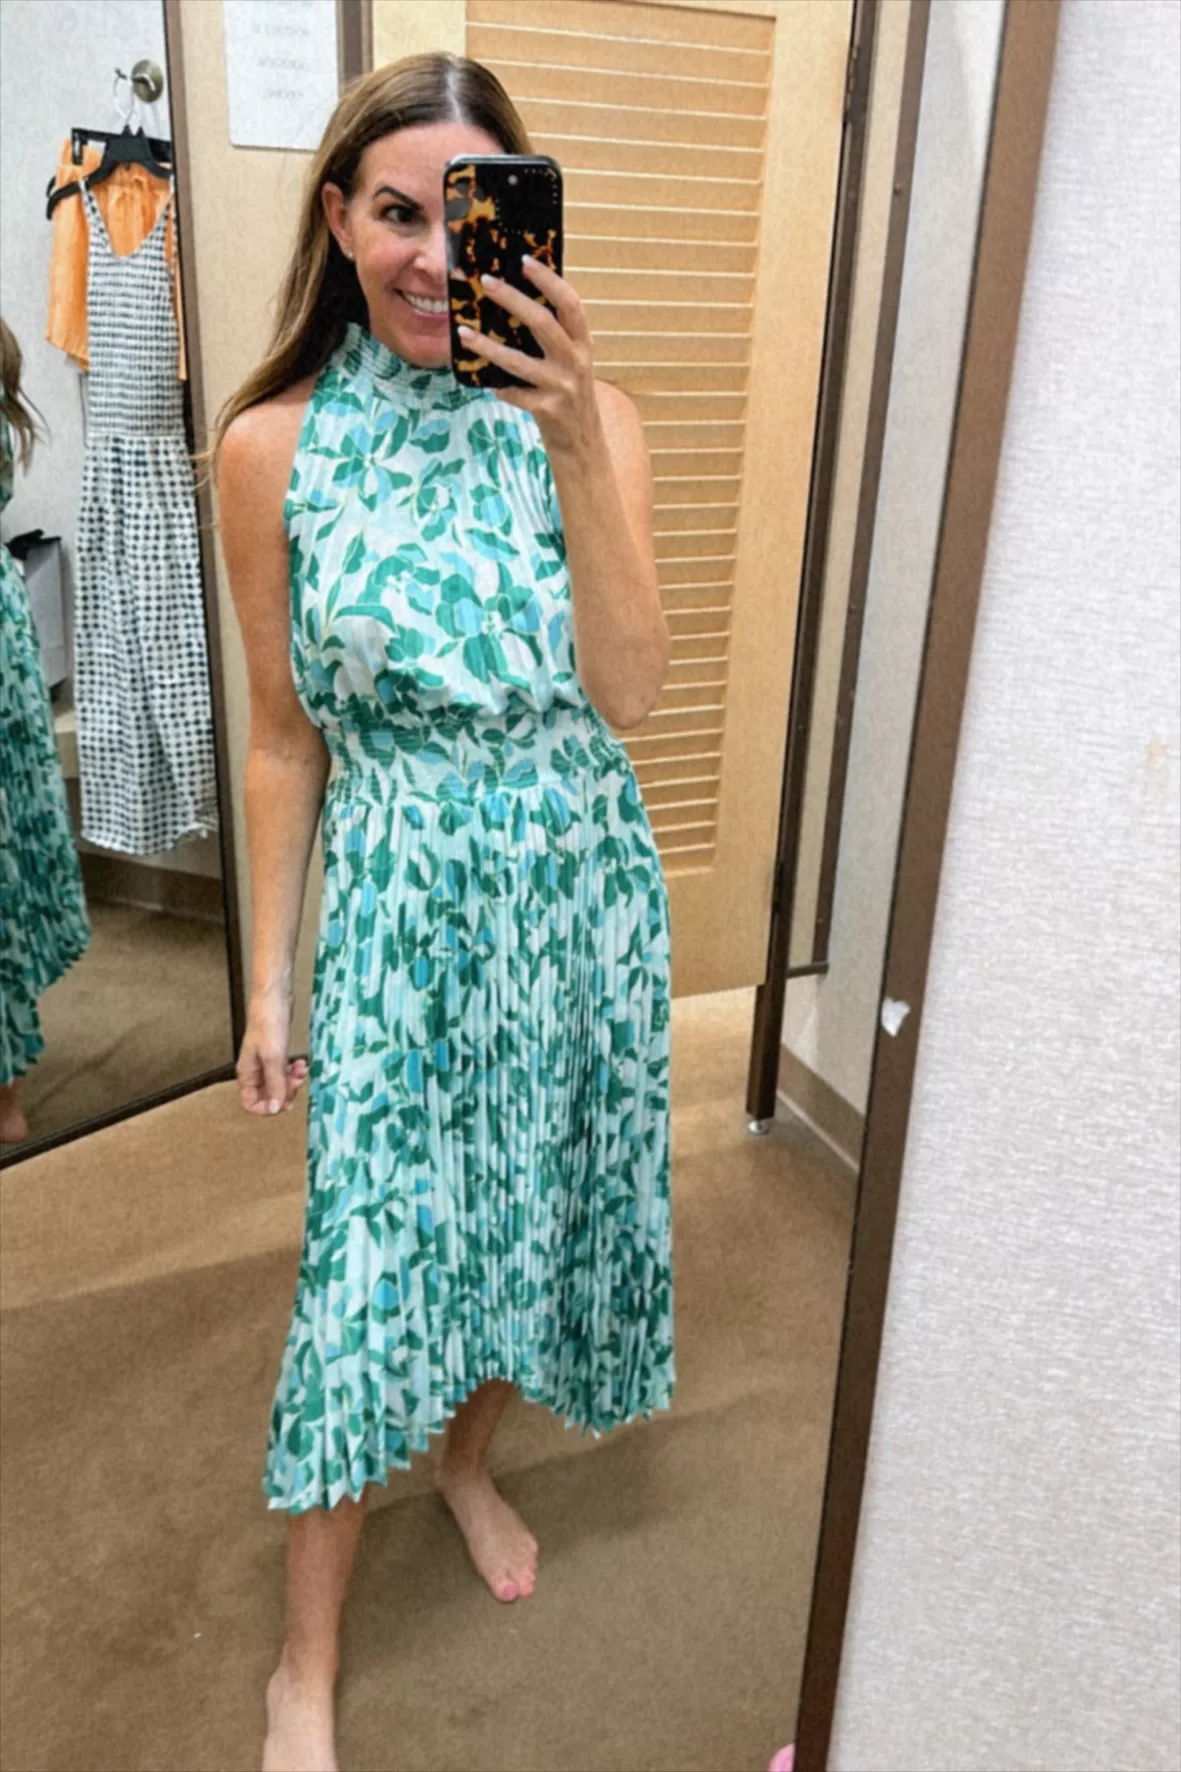 Summer Wedding Guest Dresses From Nordstrom